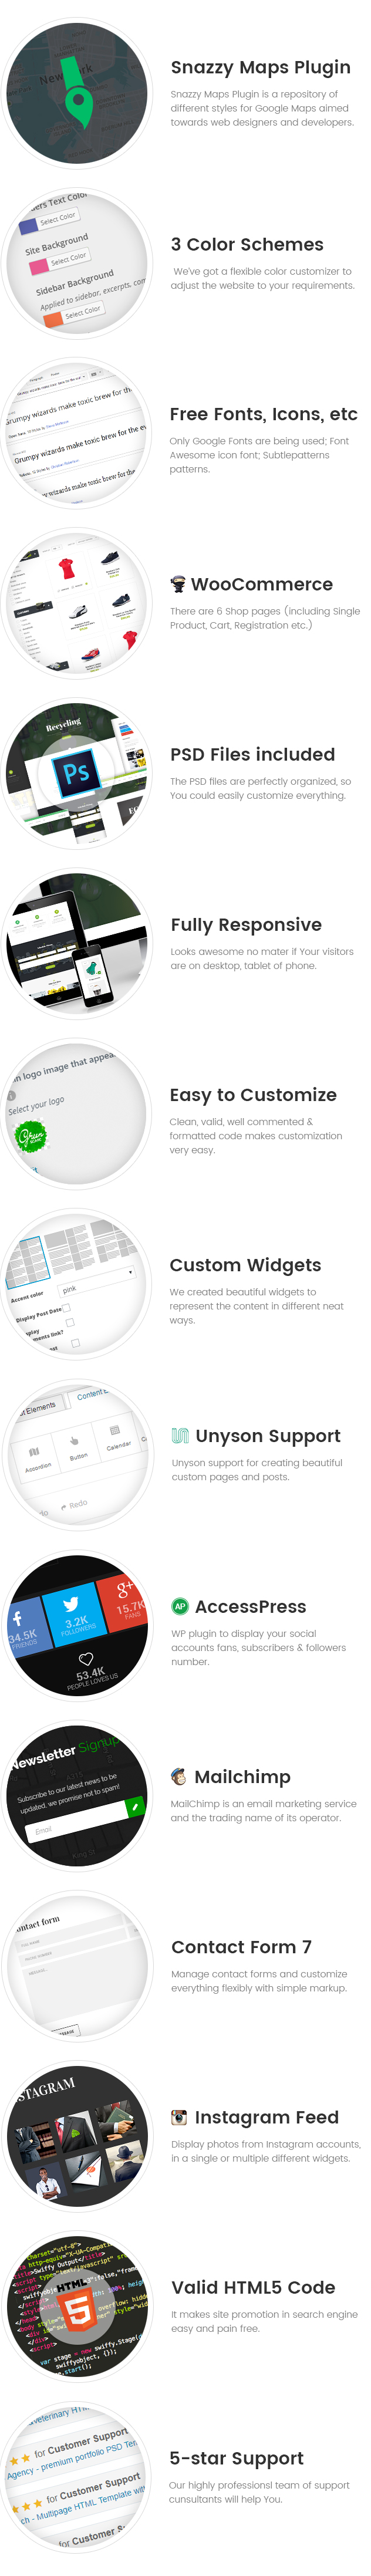 GoGreen - Waste Management and Recycling WordPress theme